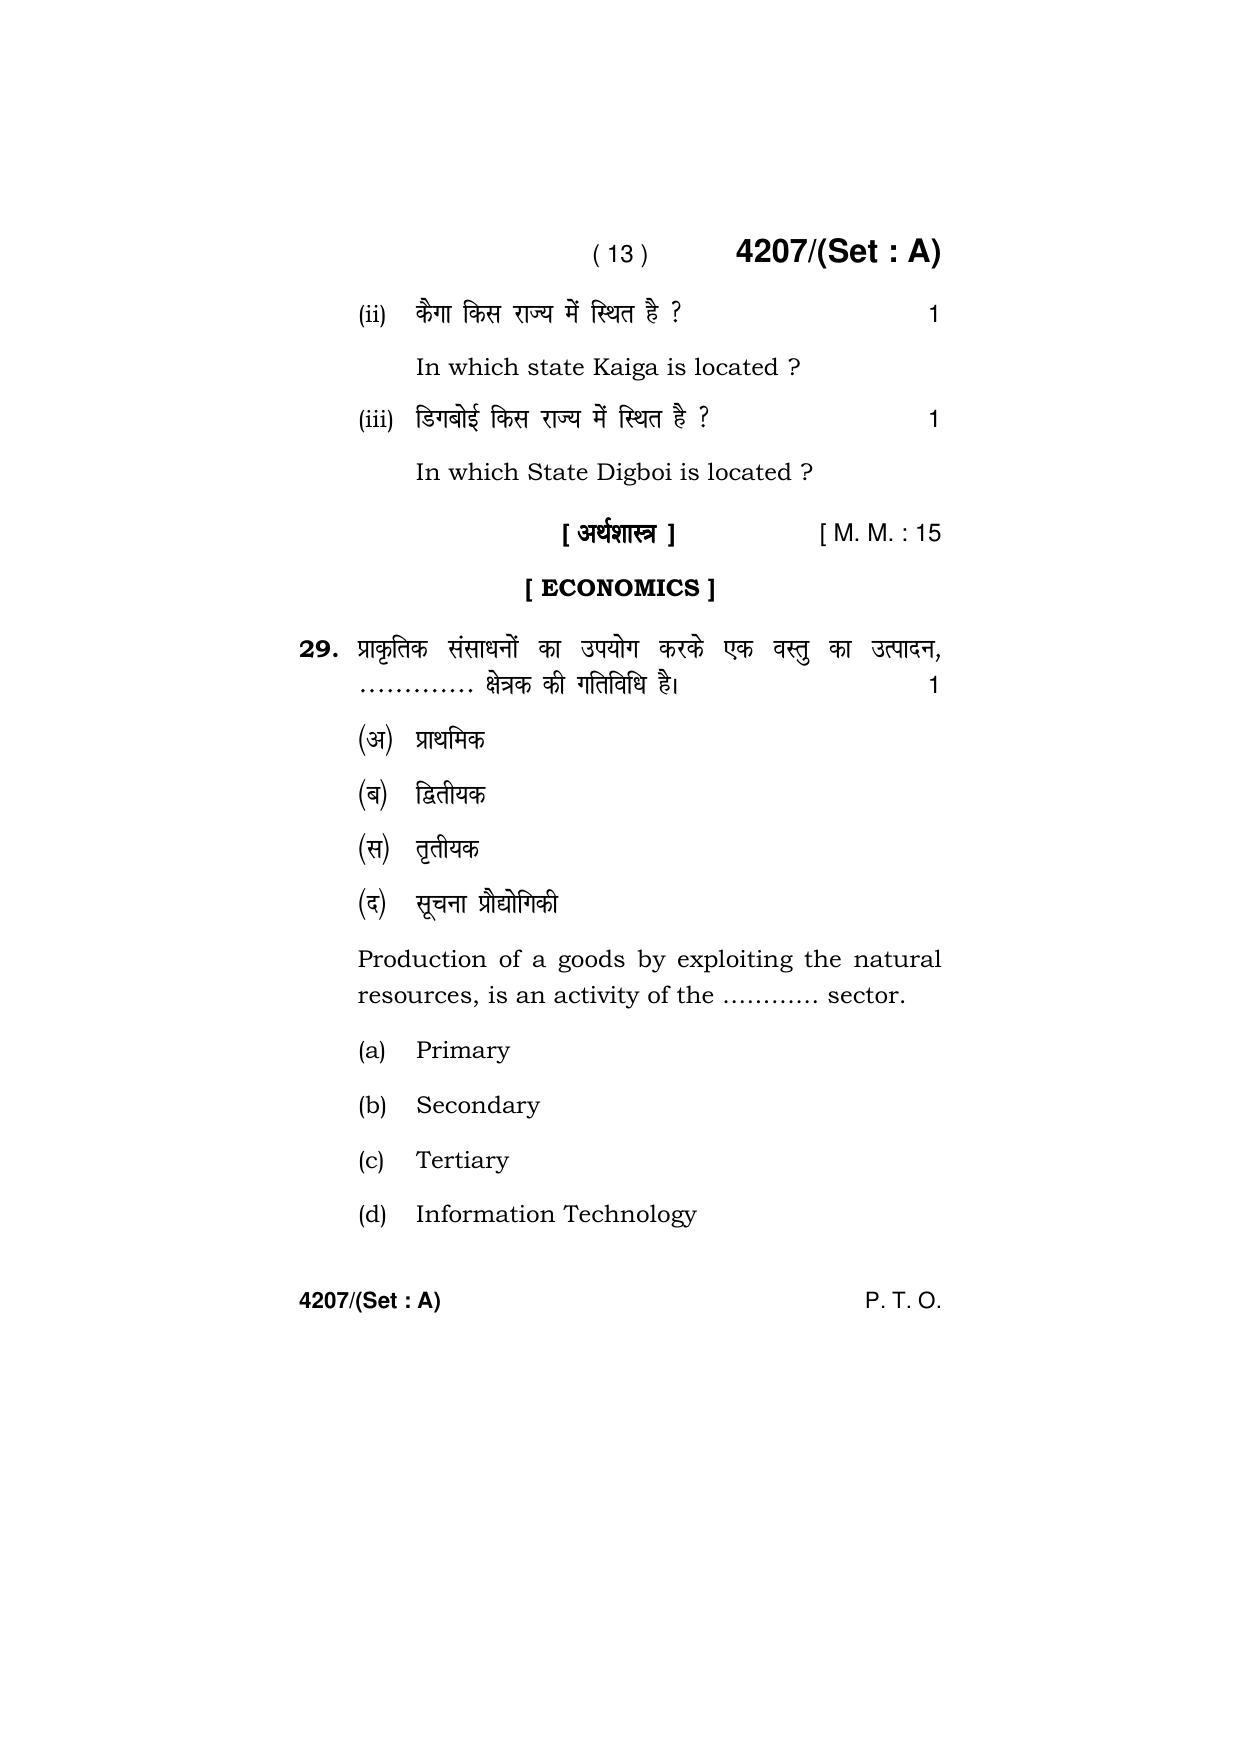 Haryana Board HBSE Class 10 Social Science (All Set) 2019 Question Paper - Page 13